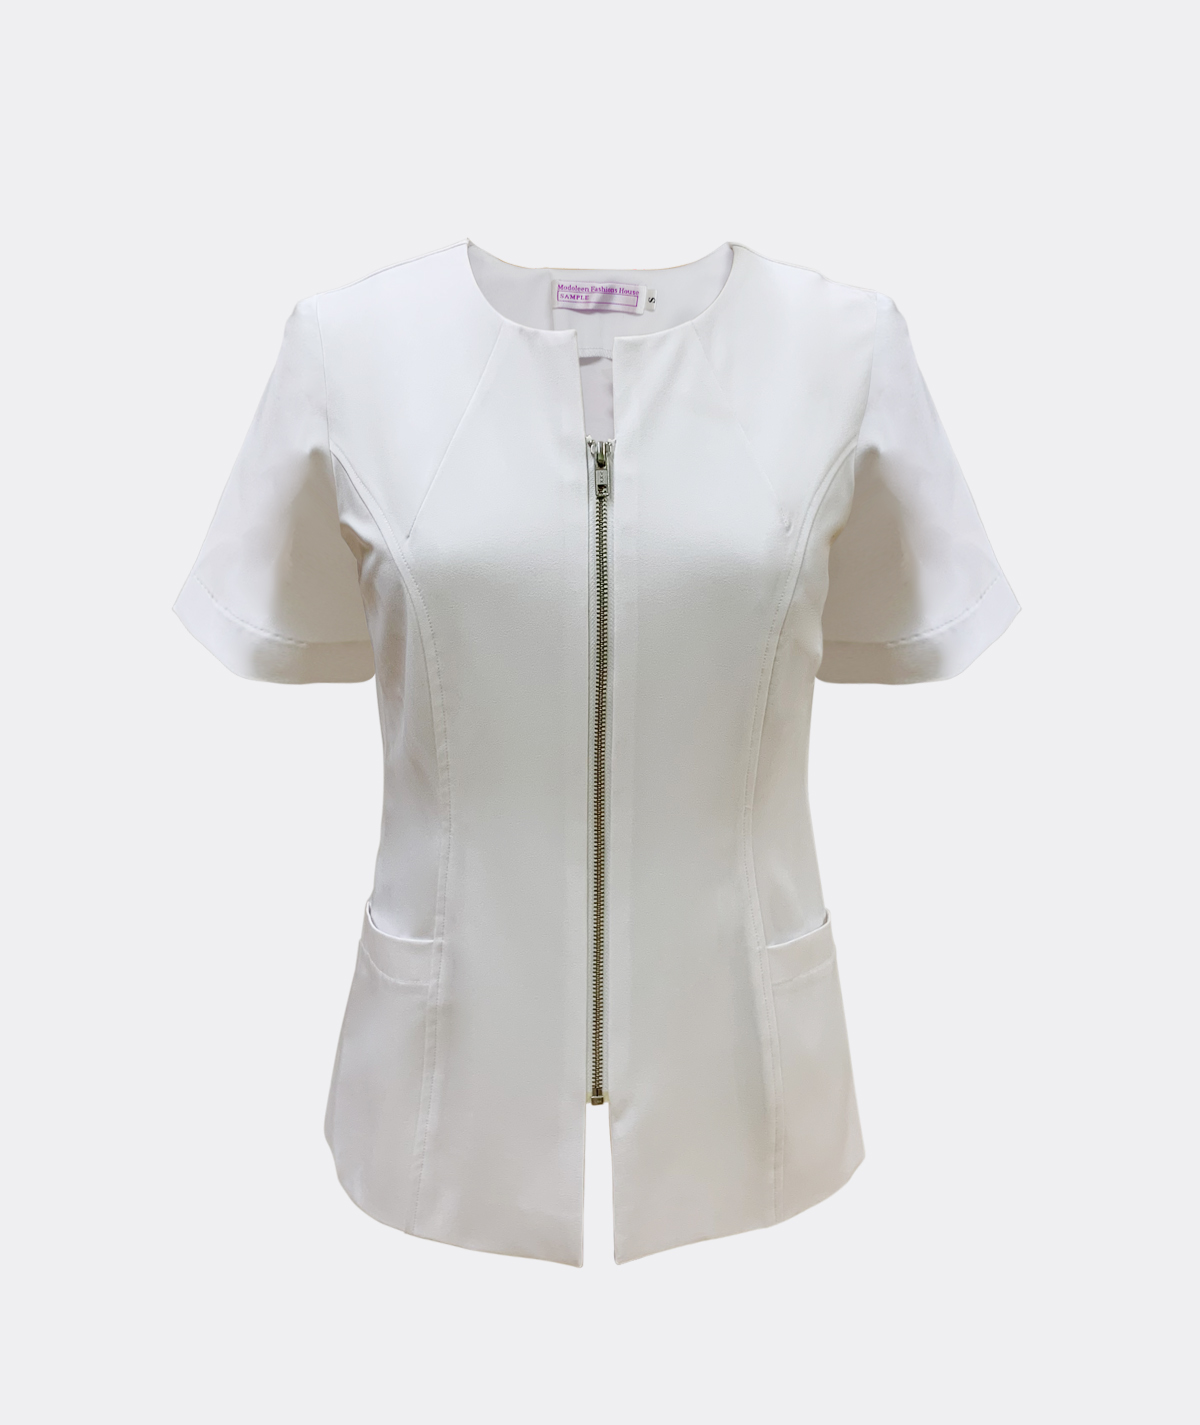 Beauty consultant blouse with silver teeth zipper